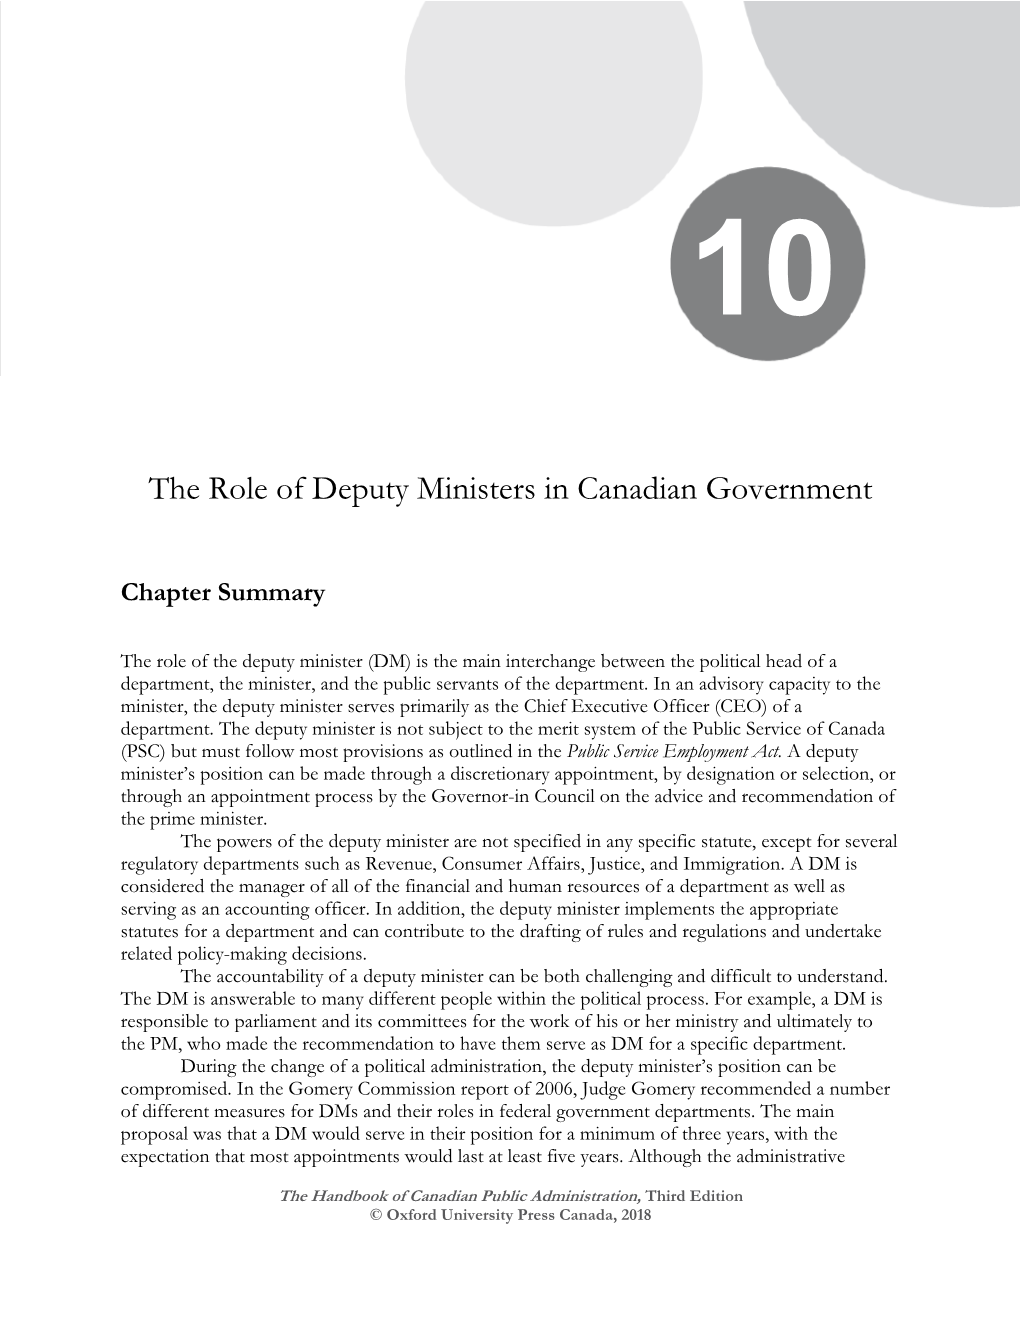 The Role of Deputy Ministers in Canadian Government